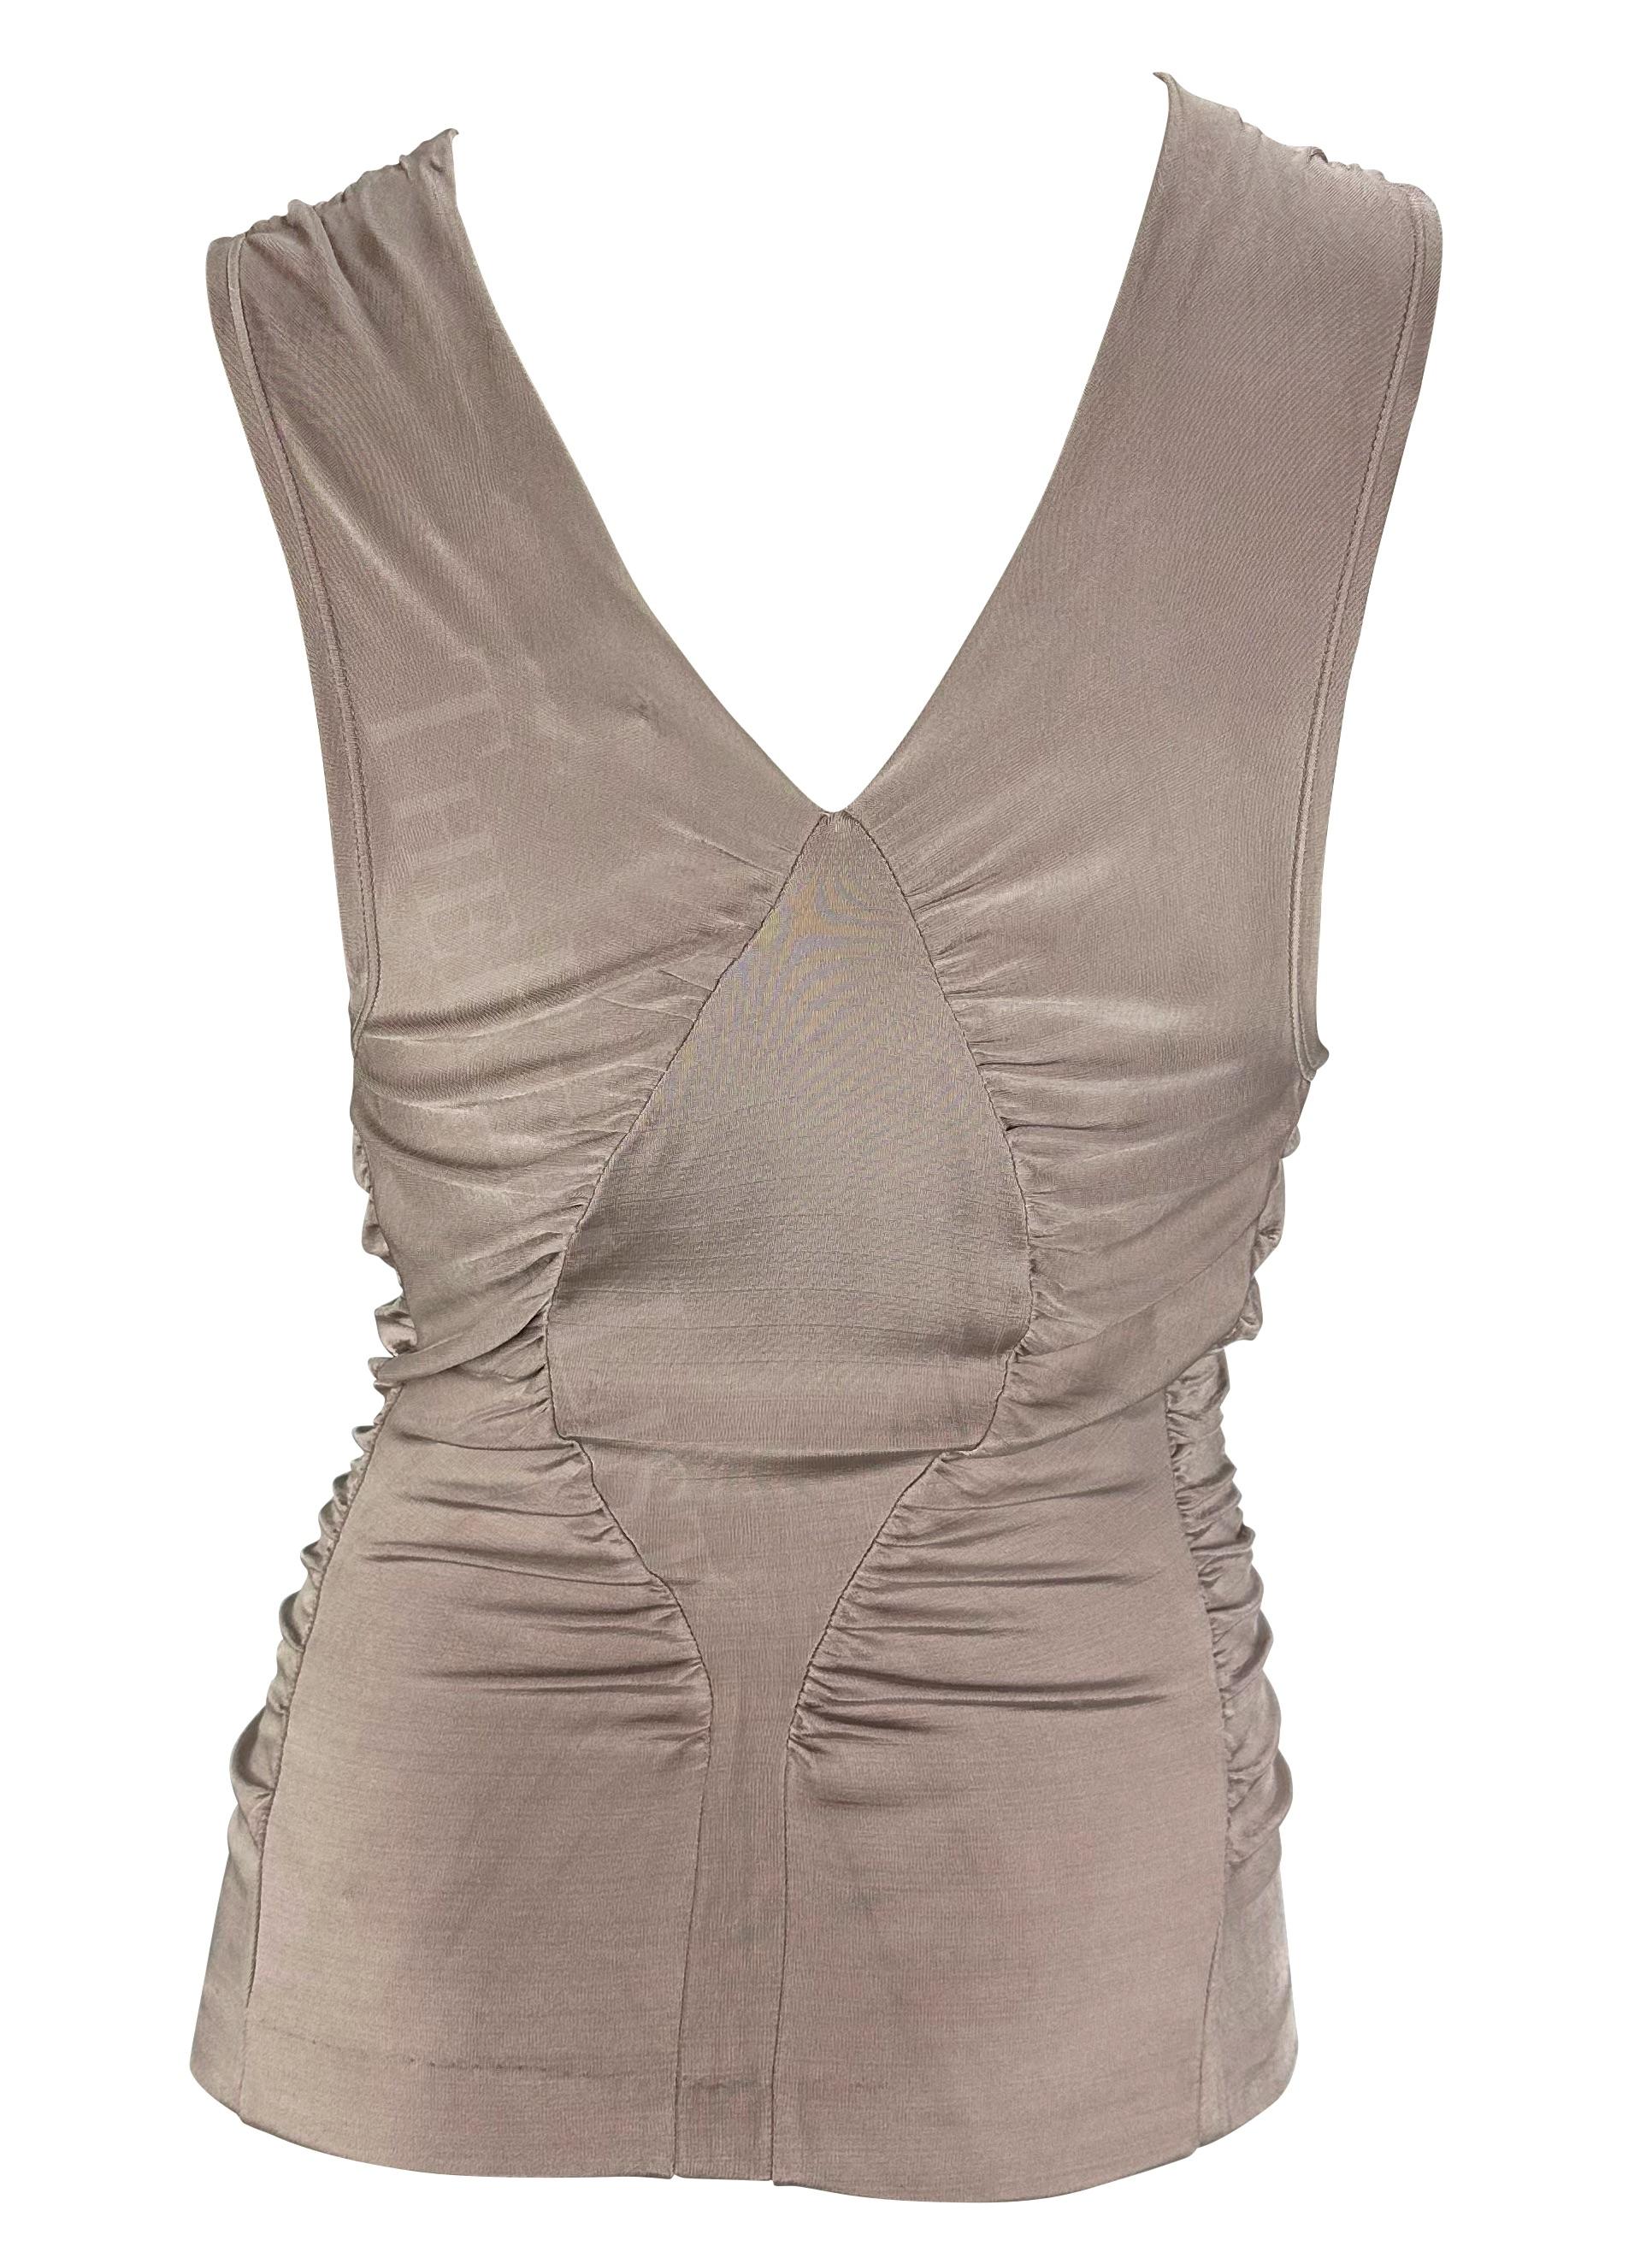 Women's S/S 2003 Yves Saint Laurent Rive Gauche by Tom Ford Blush Slinky Tank Top  For Sale